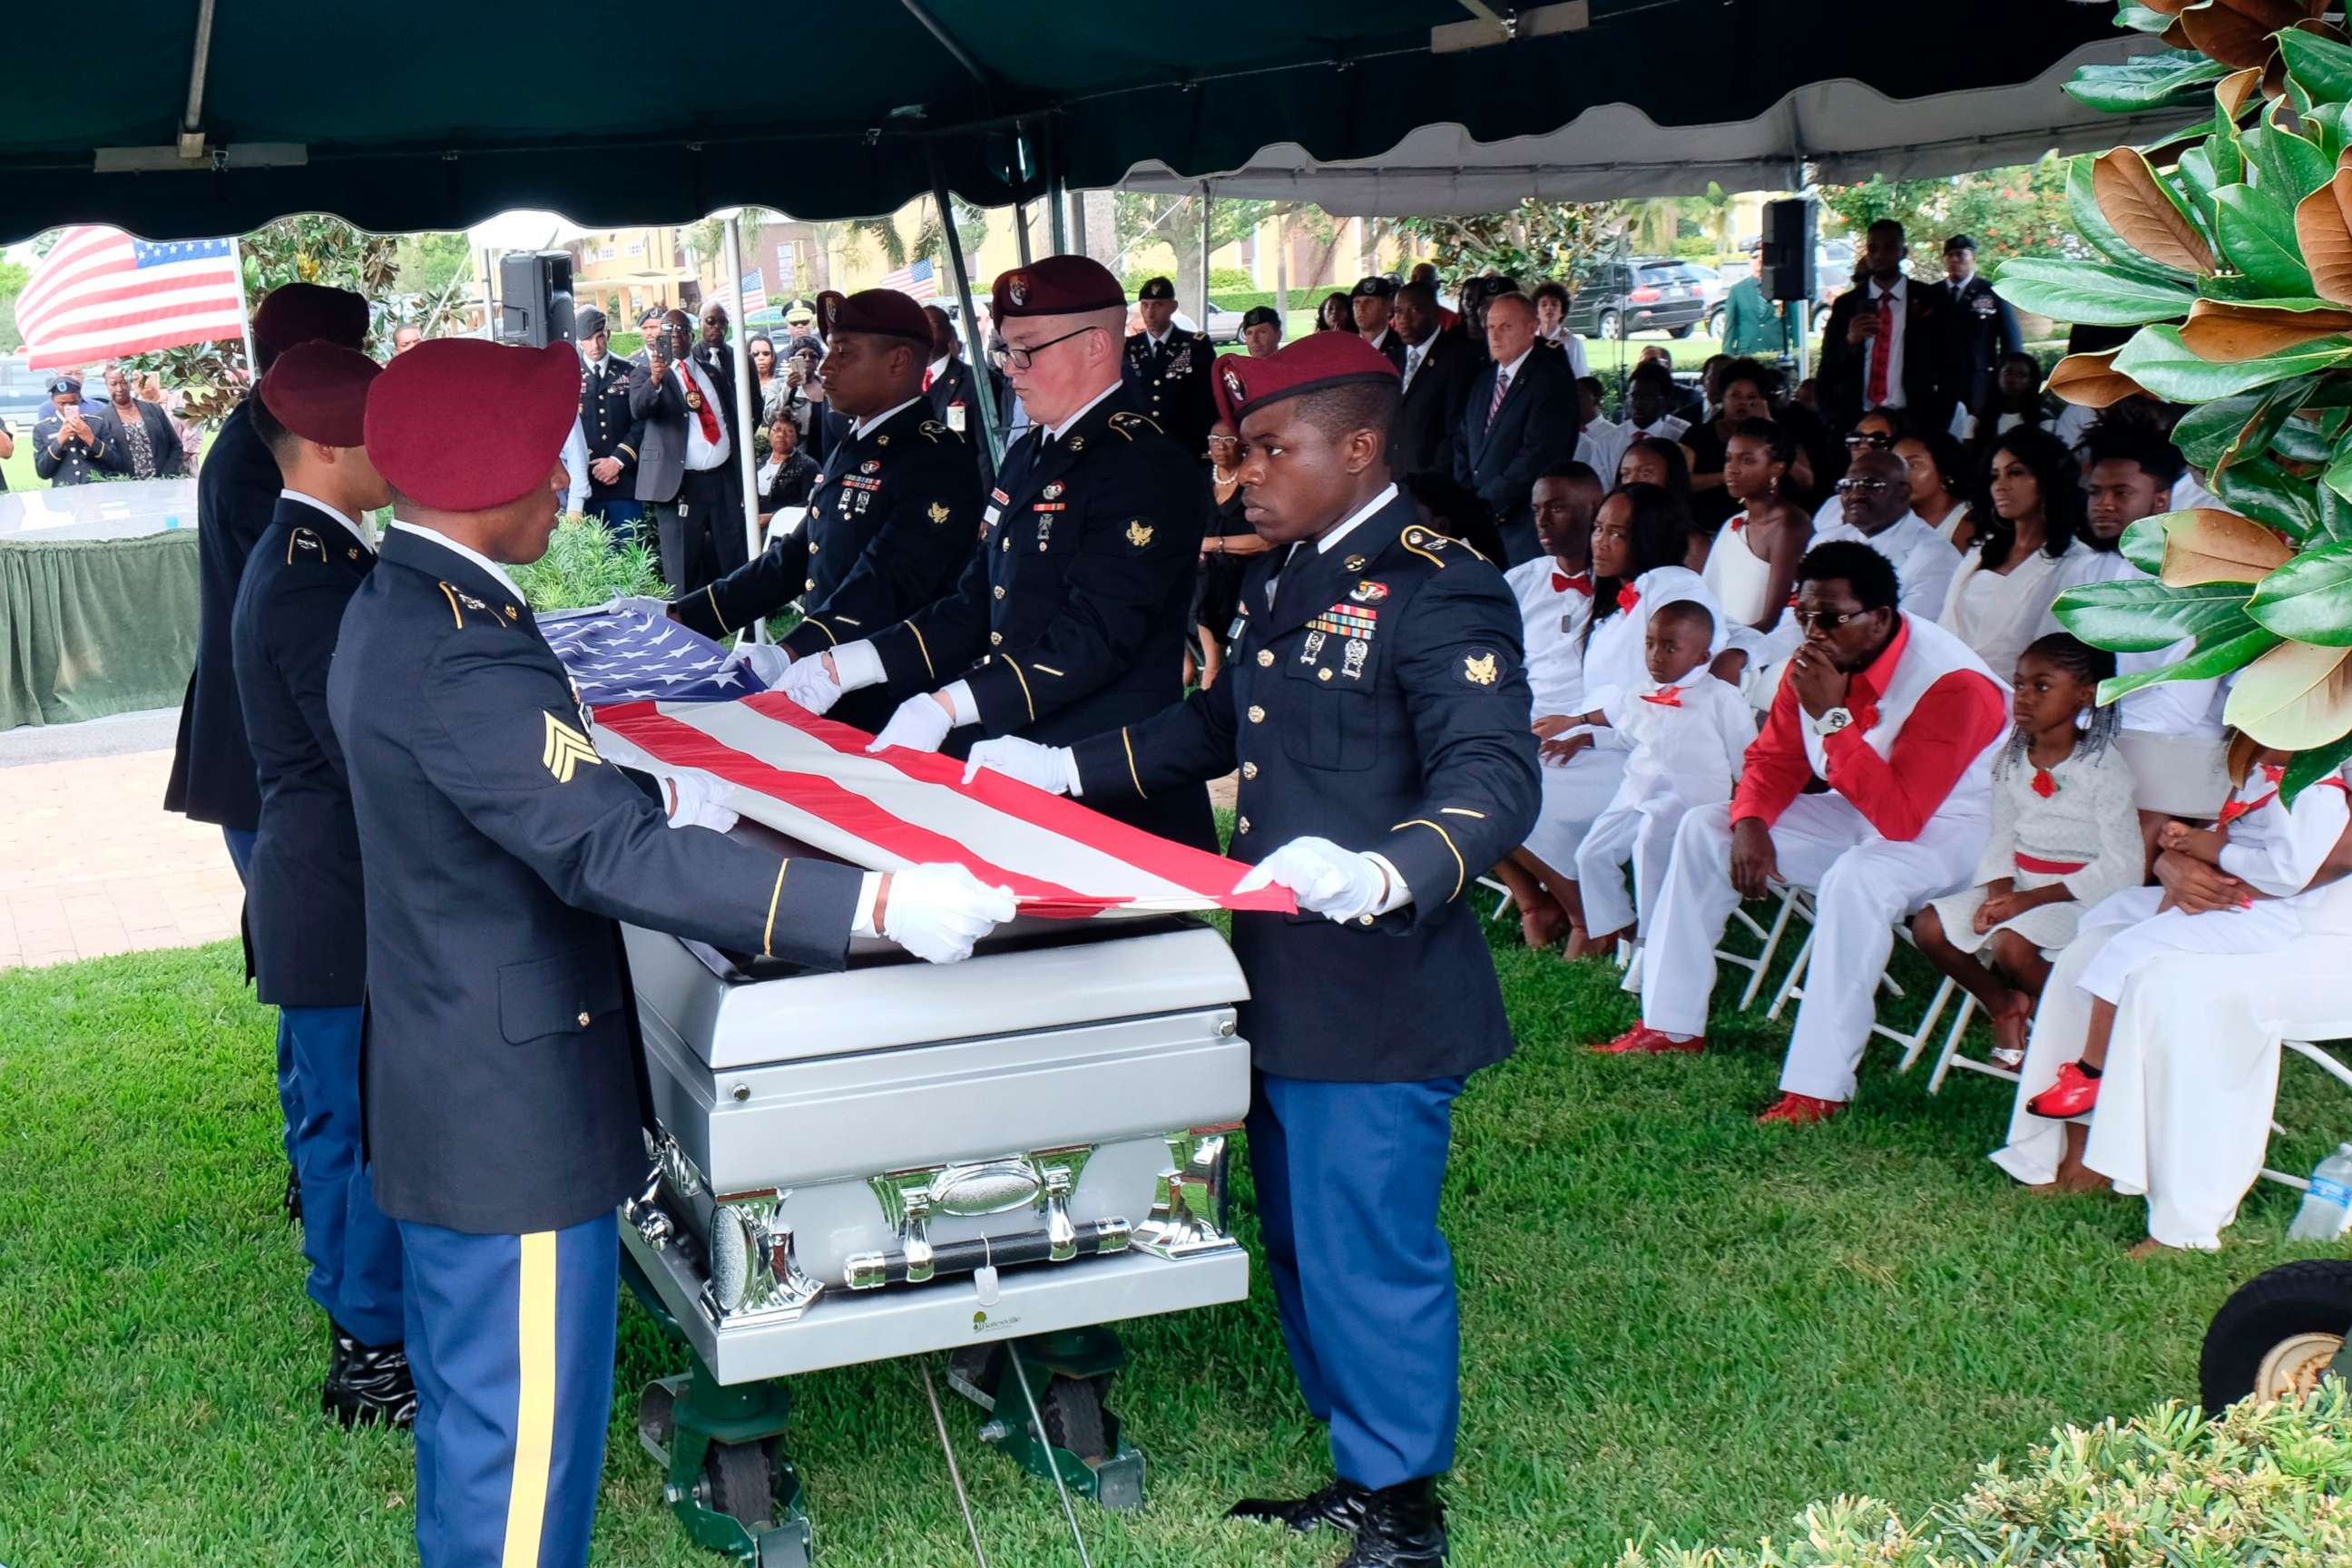 PHOTO: Members of the army honor guard fold the flag above the casket of US Army Sgt. La David Johnson during his burial service on October 21, 2017 in Hollywood, Florida. Johnson and three other US soldiers were killed in an ambush in Niger on October 4.